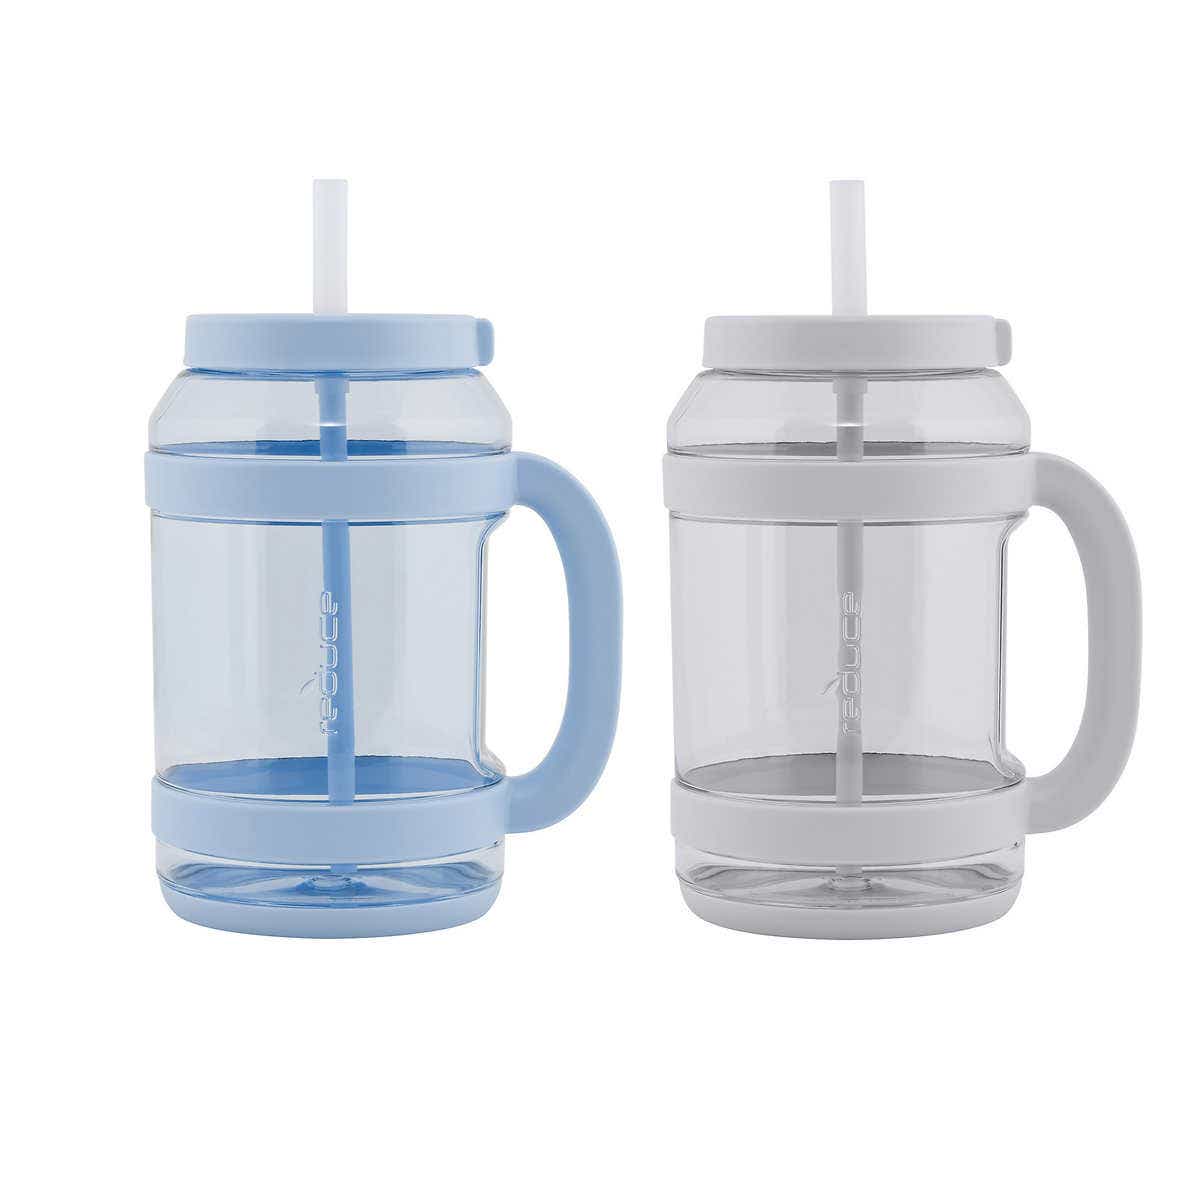 Reduce WaterDay, 2-pack blue and gray